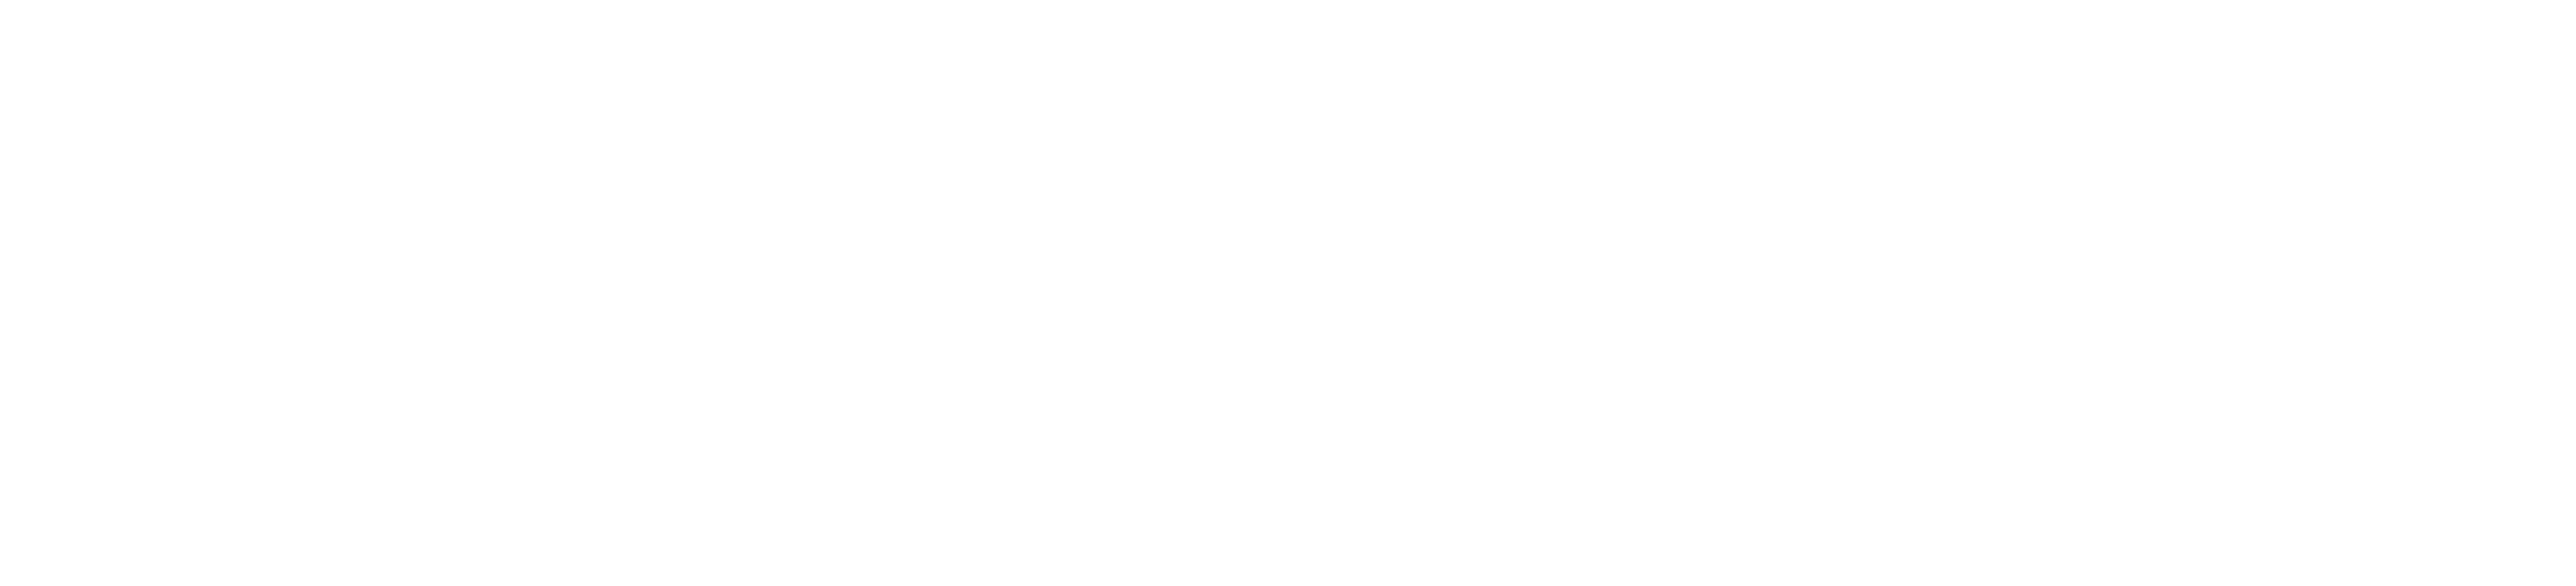 World Space Week Colombia-04 - Black-and-white Clipart (3375x1227), Png Download